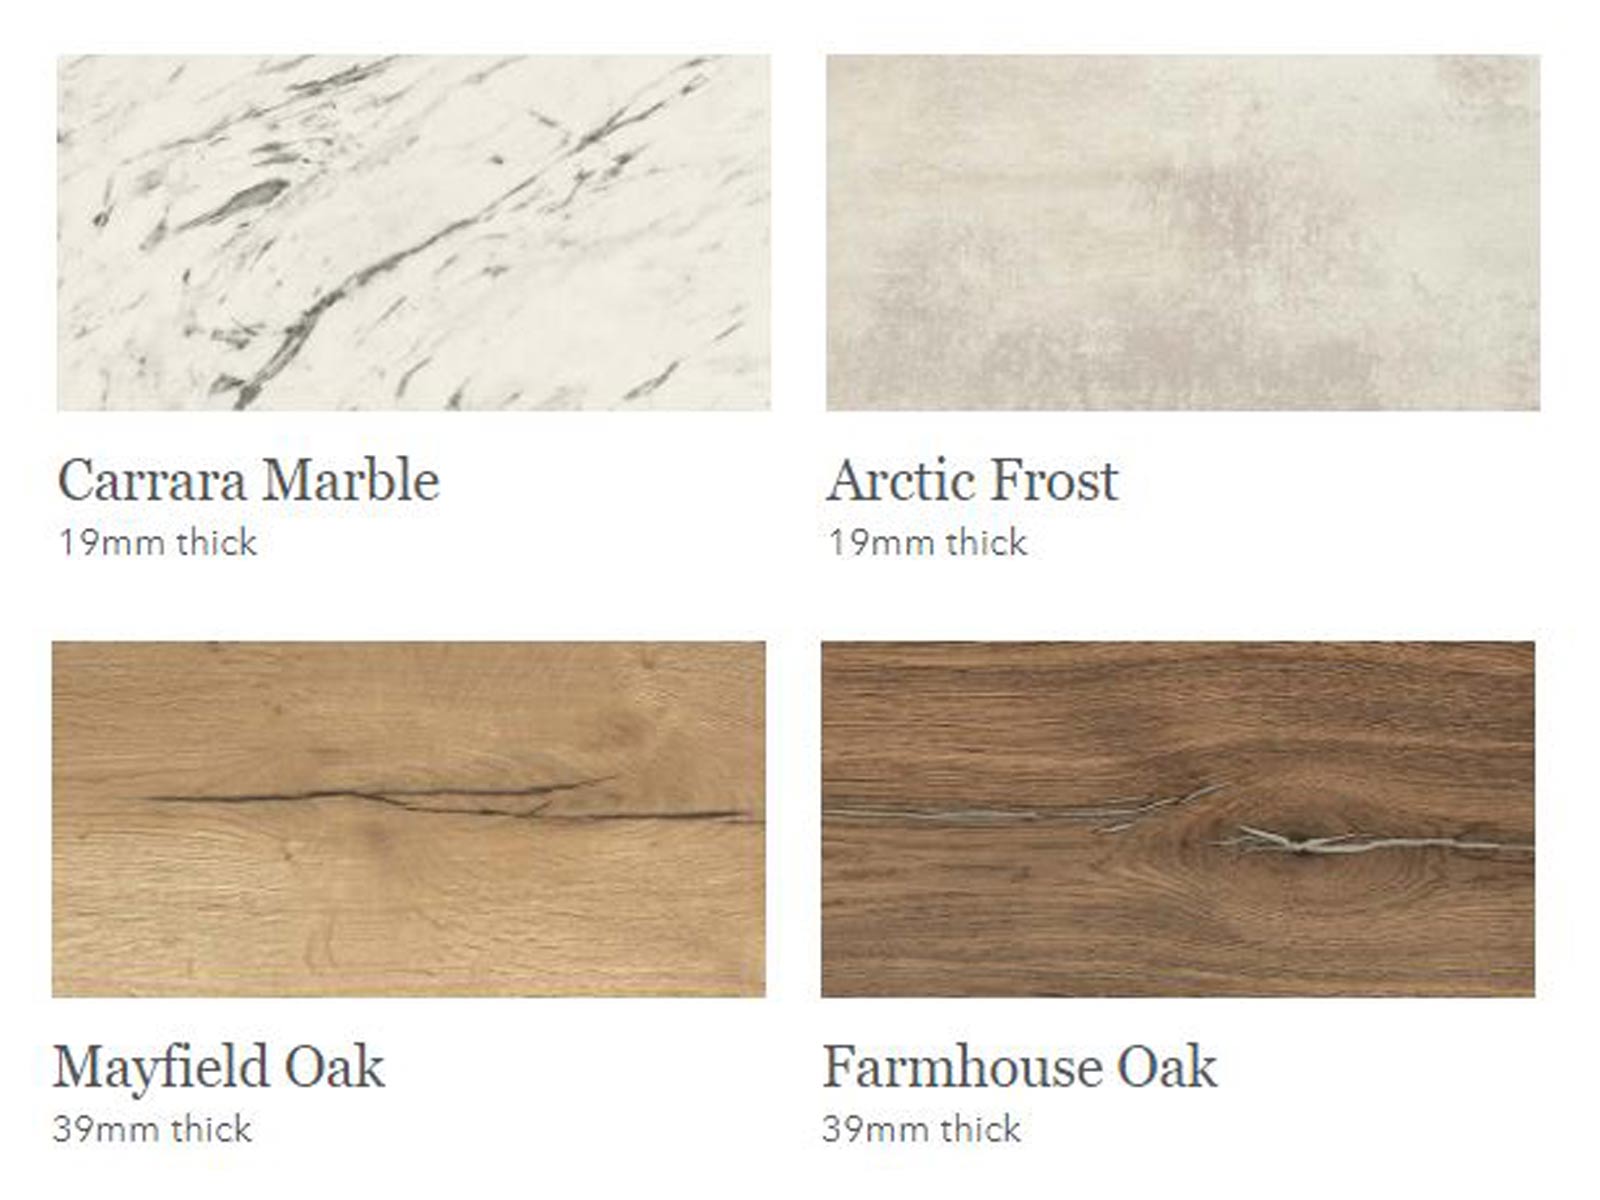 Kitchen counter finish varieties including marble and wood countertops